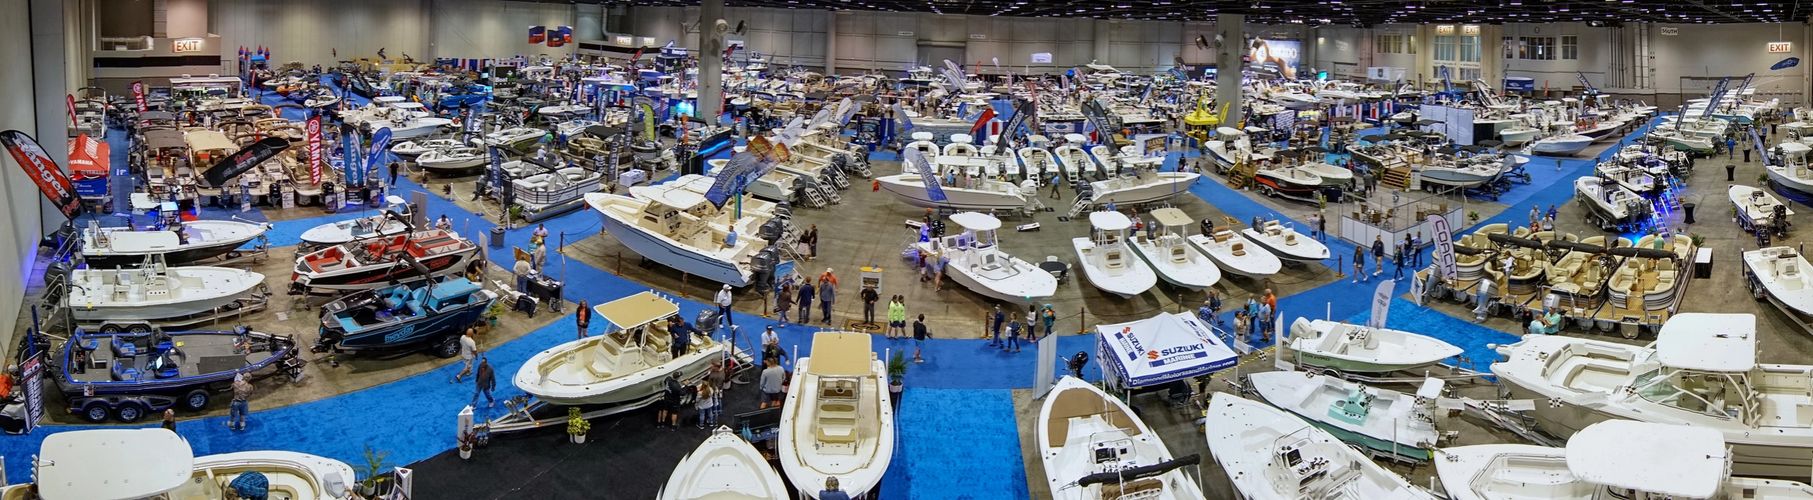 A picture of the boat show with over 400 boats.